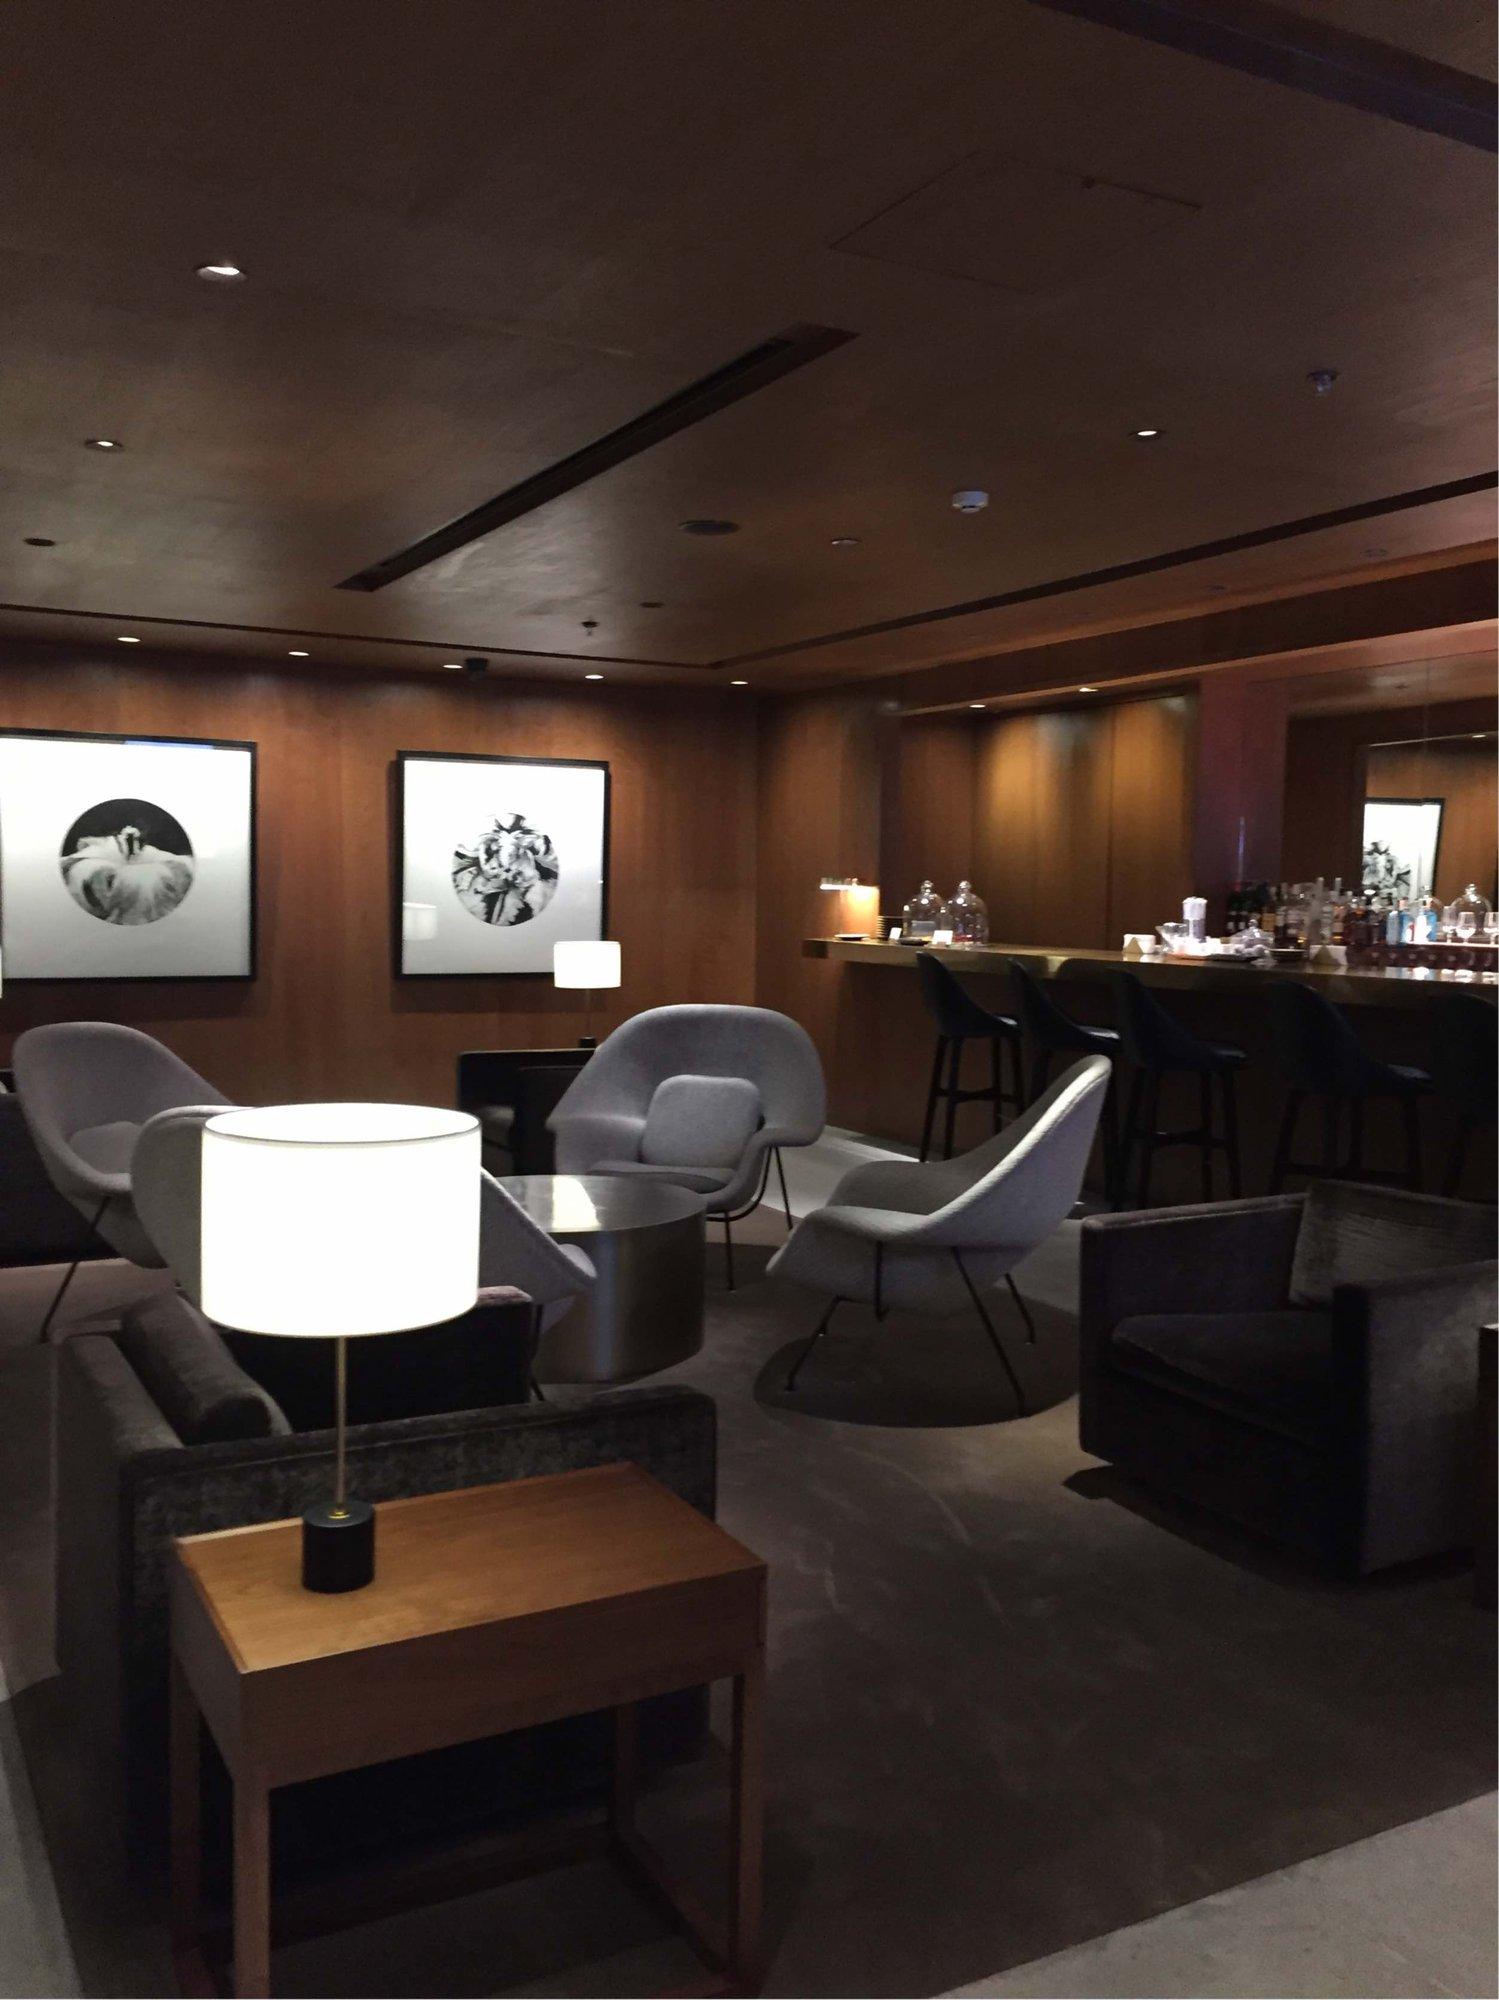 Cathay Pacific First and Business Class Lounge image 10 of 19